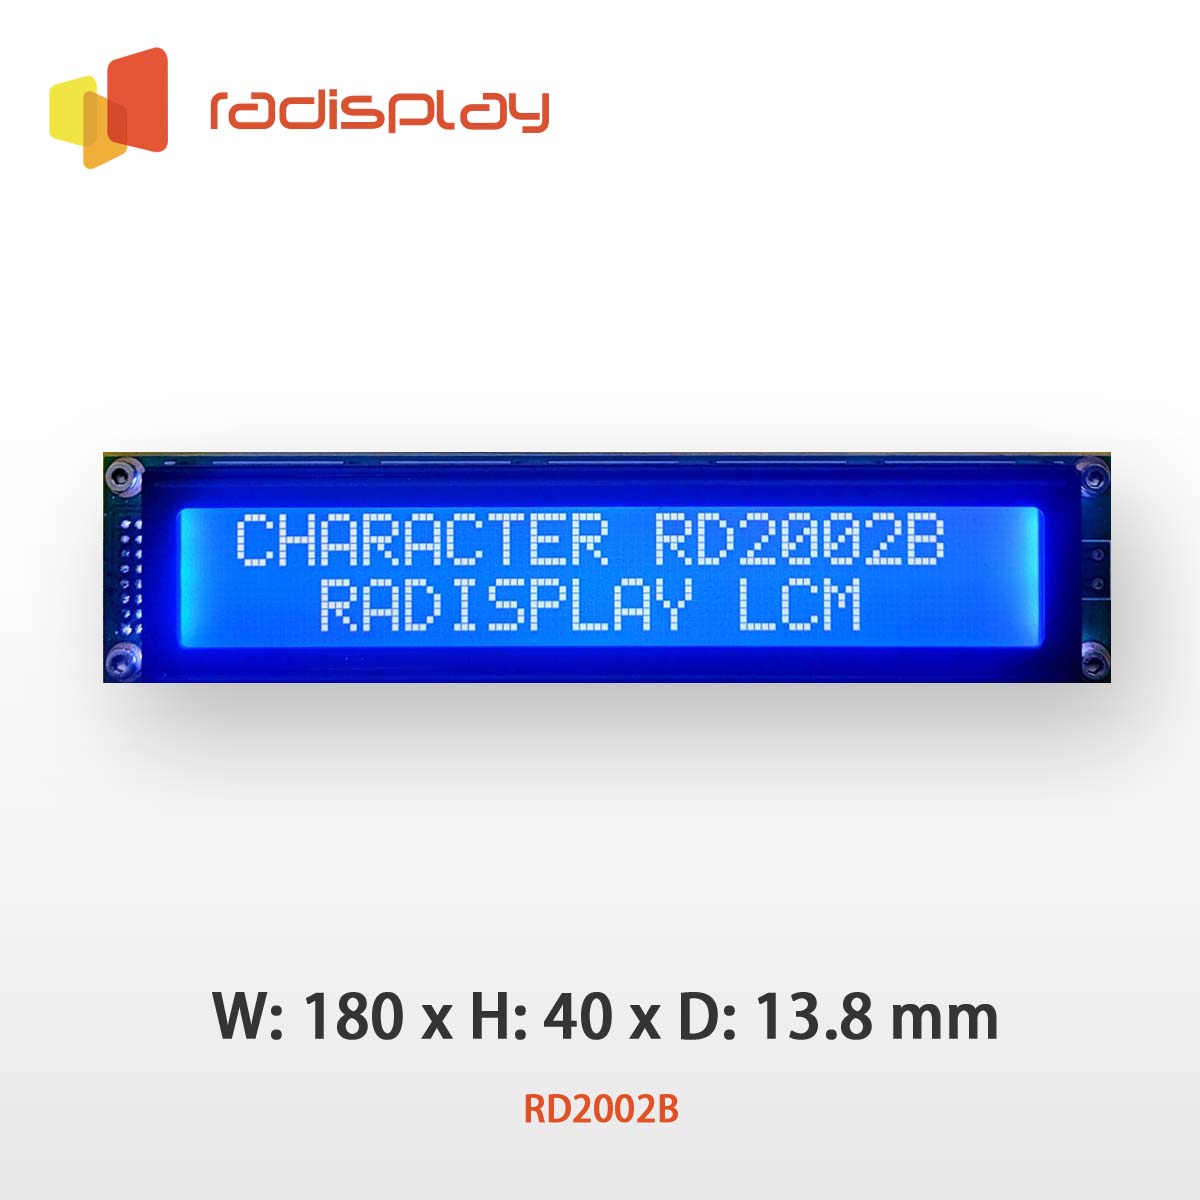 20x2 Character LCD Display Module, large character size